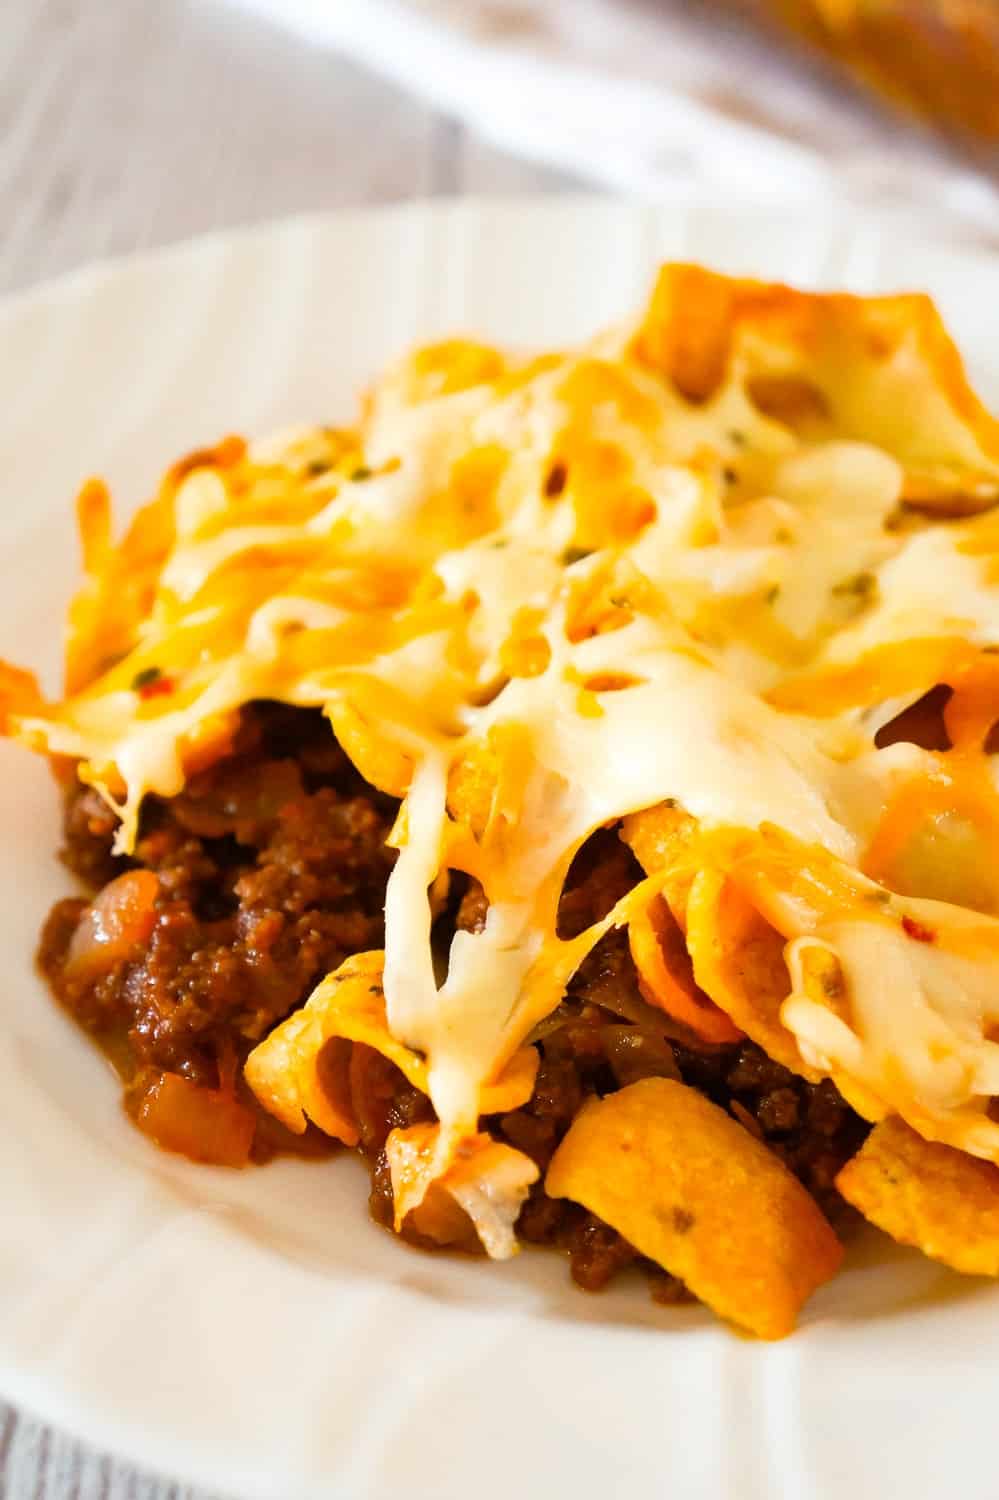 Sloppy Joe Frito Pie is an easy ground beef dinner recipe perfect for weeknights. Ground beef and onions are tossed in homemade sloppy joe sauce and then topped with Frito's corn chips and cheddar cheese.